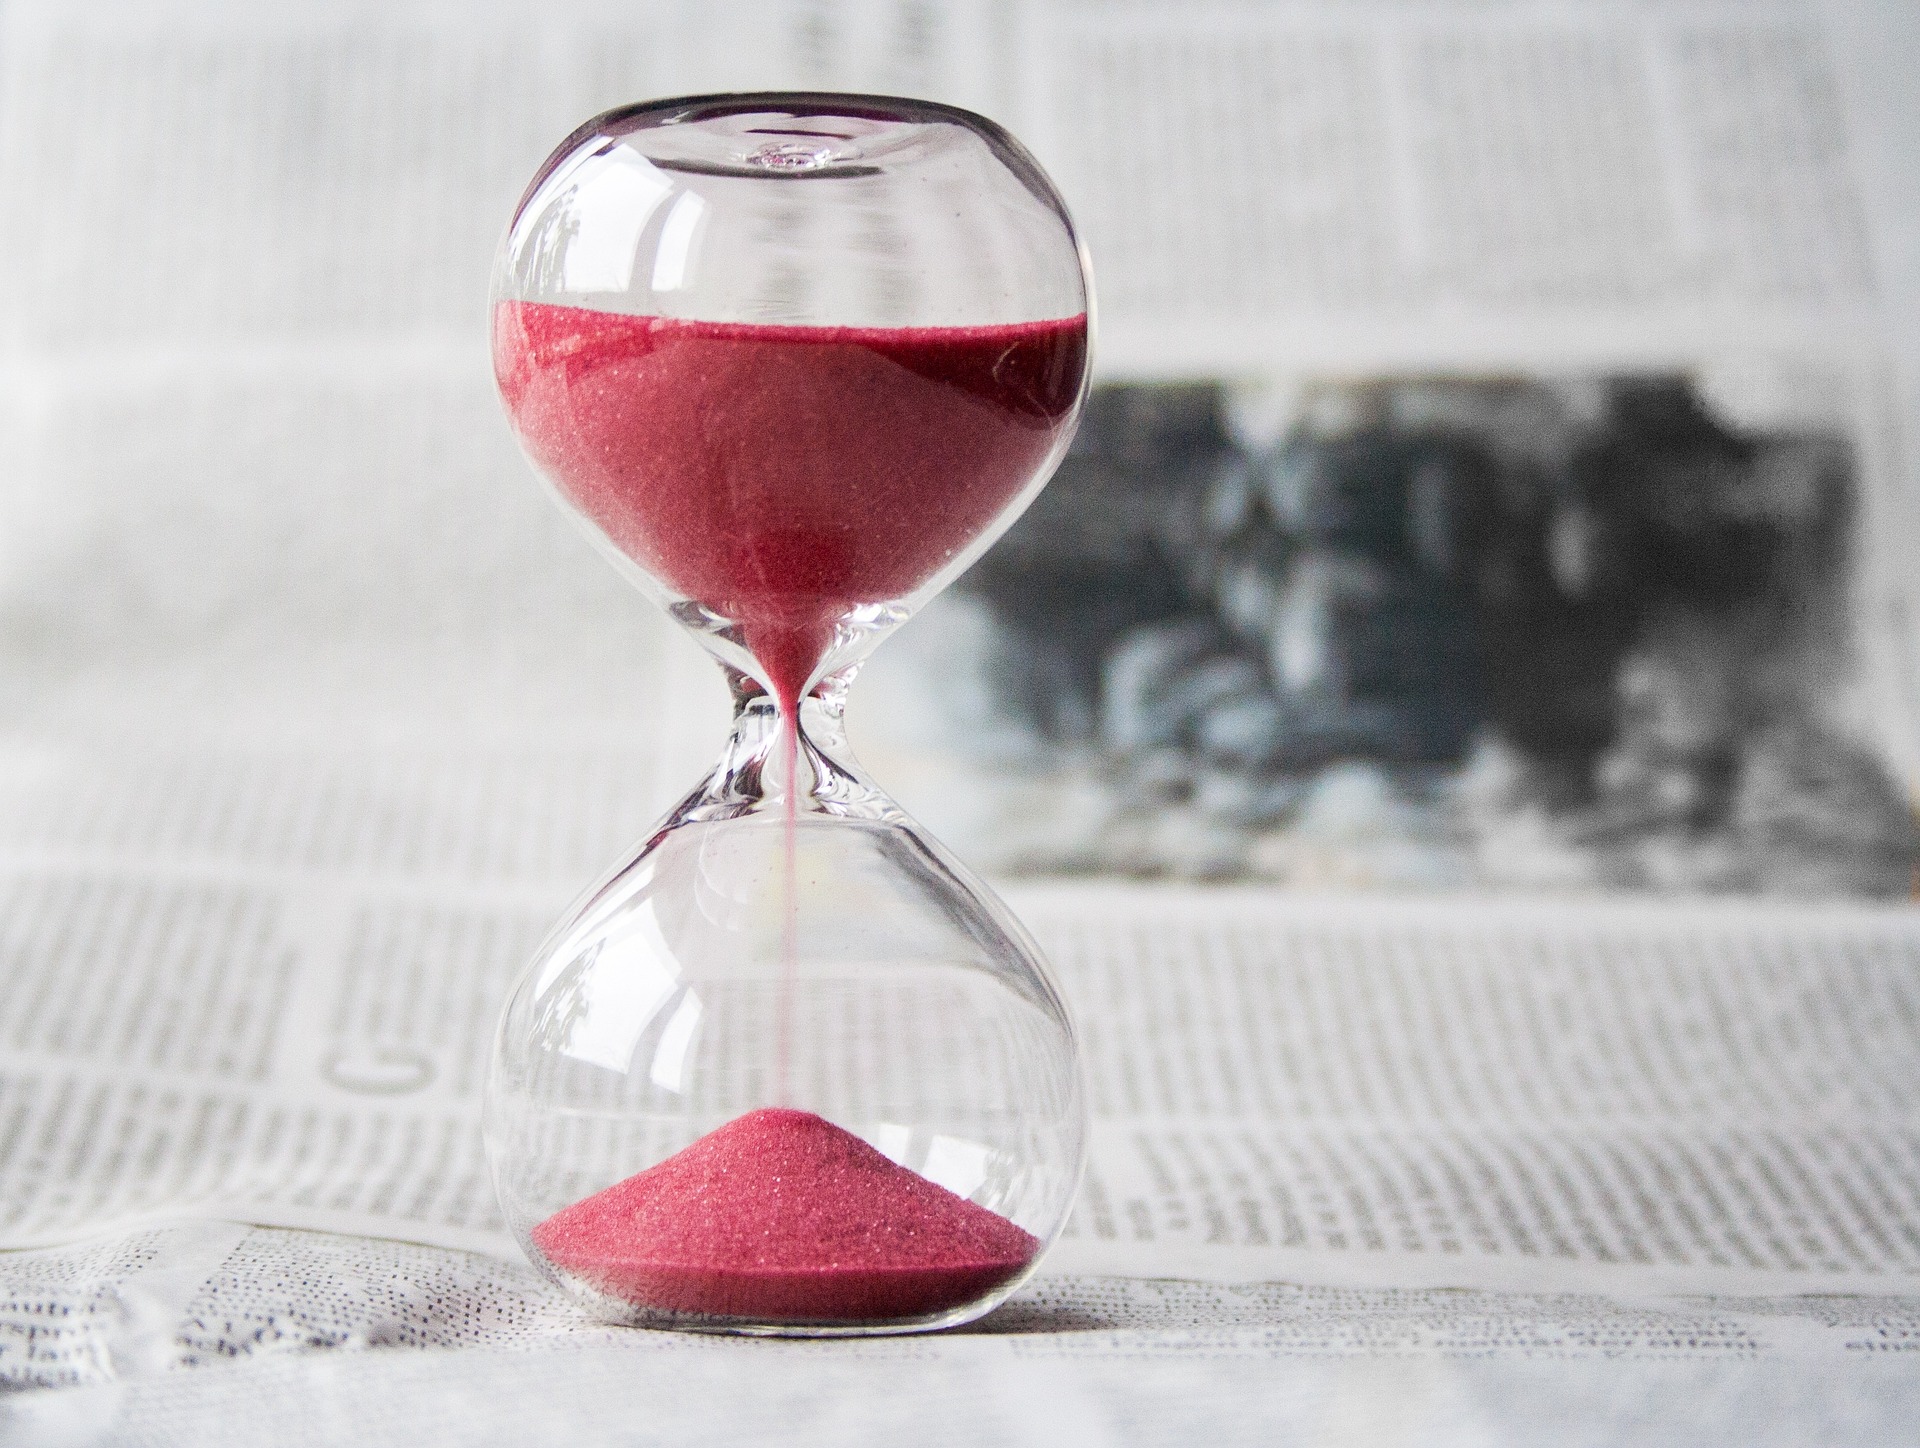 Hourglass with pink sand on a newspaper, a metaphor for the time and patience needed in alimony negotiations, guided by a Baltimore County divorce lawyer through collaborative law